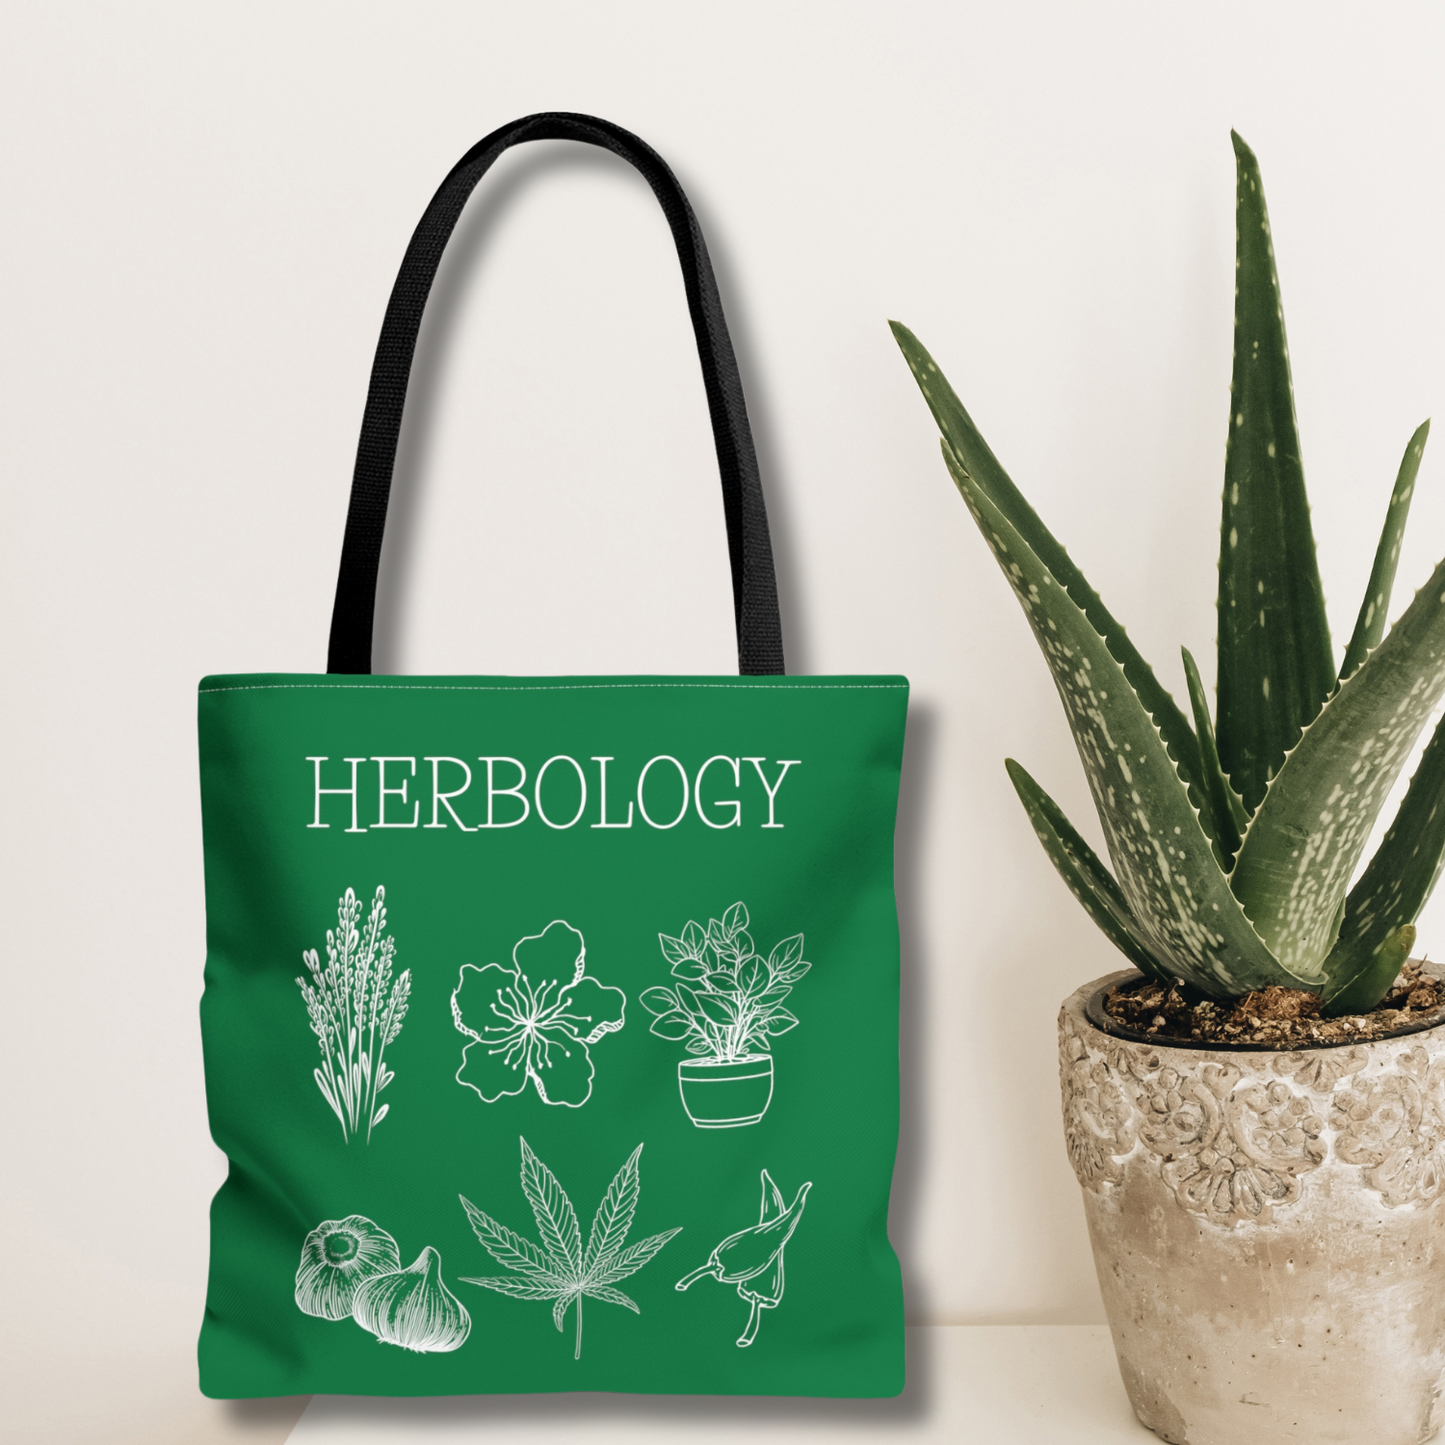 Magical Herbology tote bag inspired by hogwarts classes. Features a simple design of flowers, herbs and plants. Bag is green with a black handle.